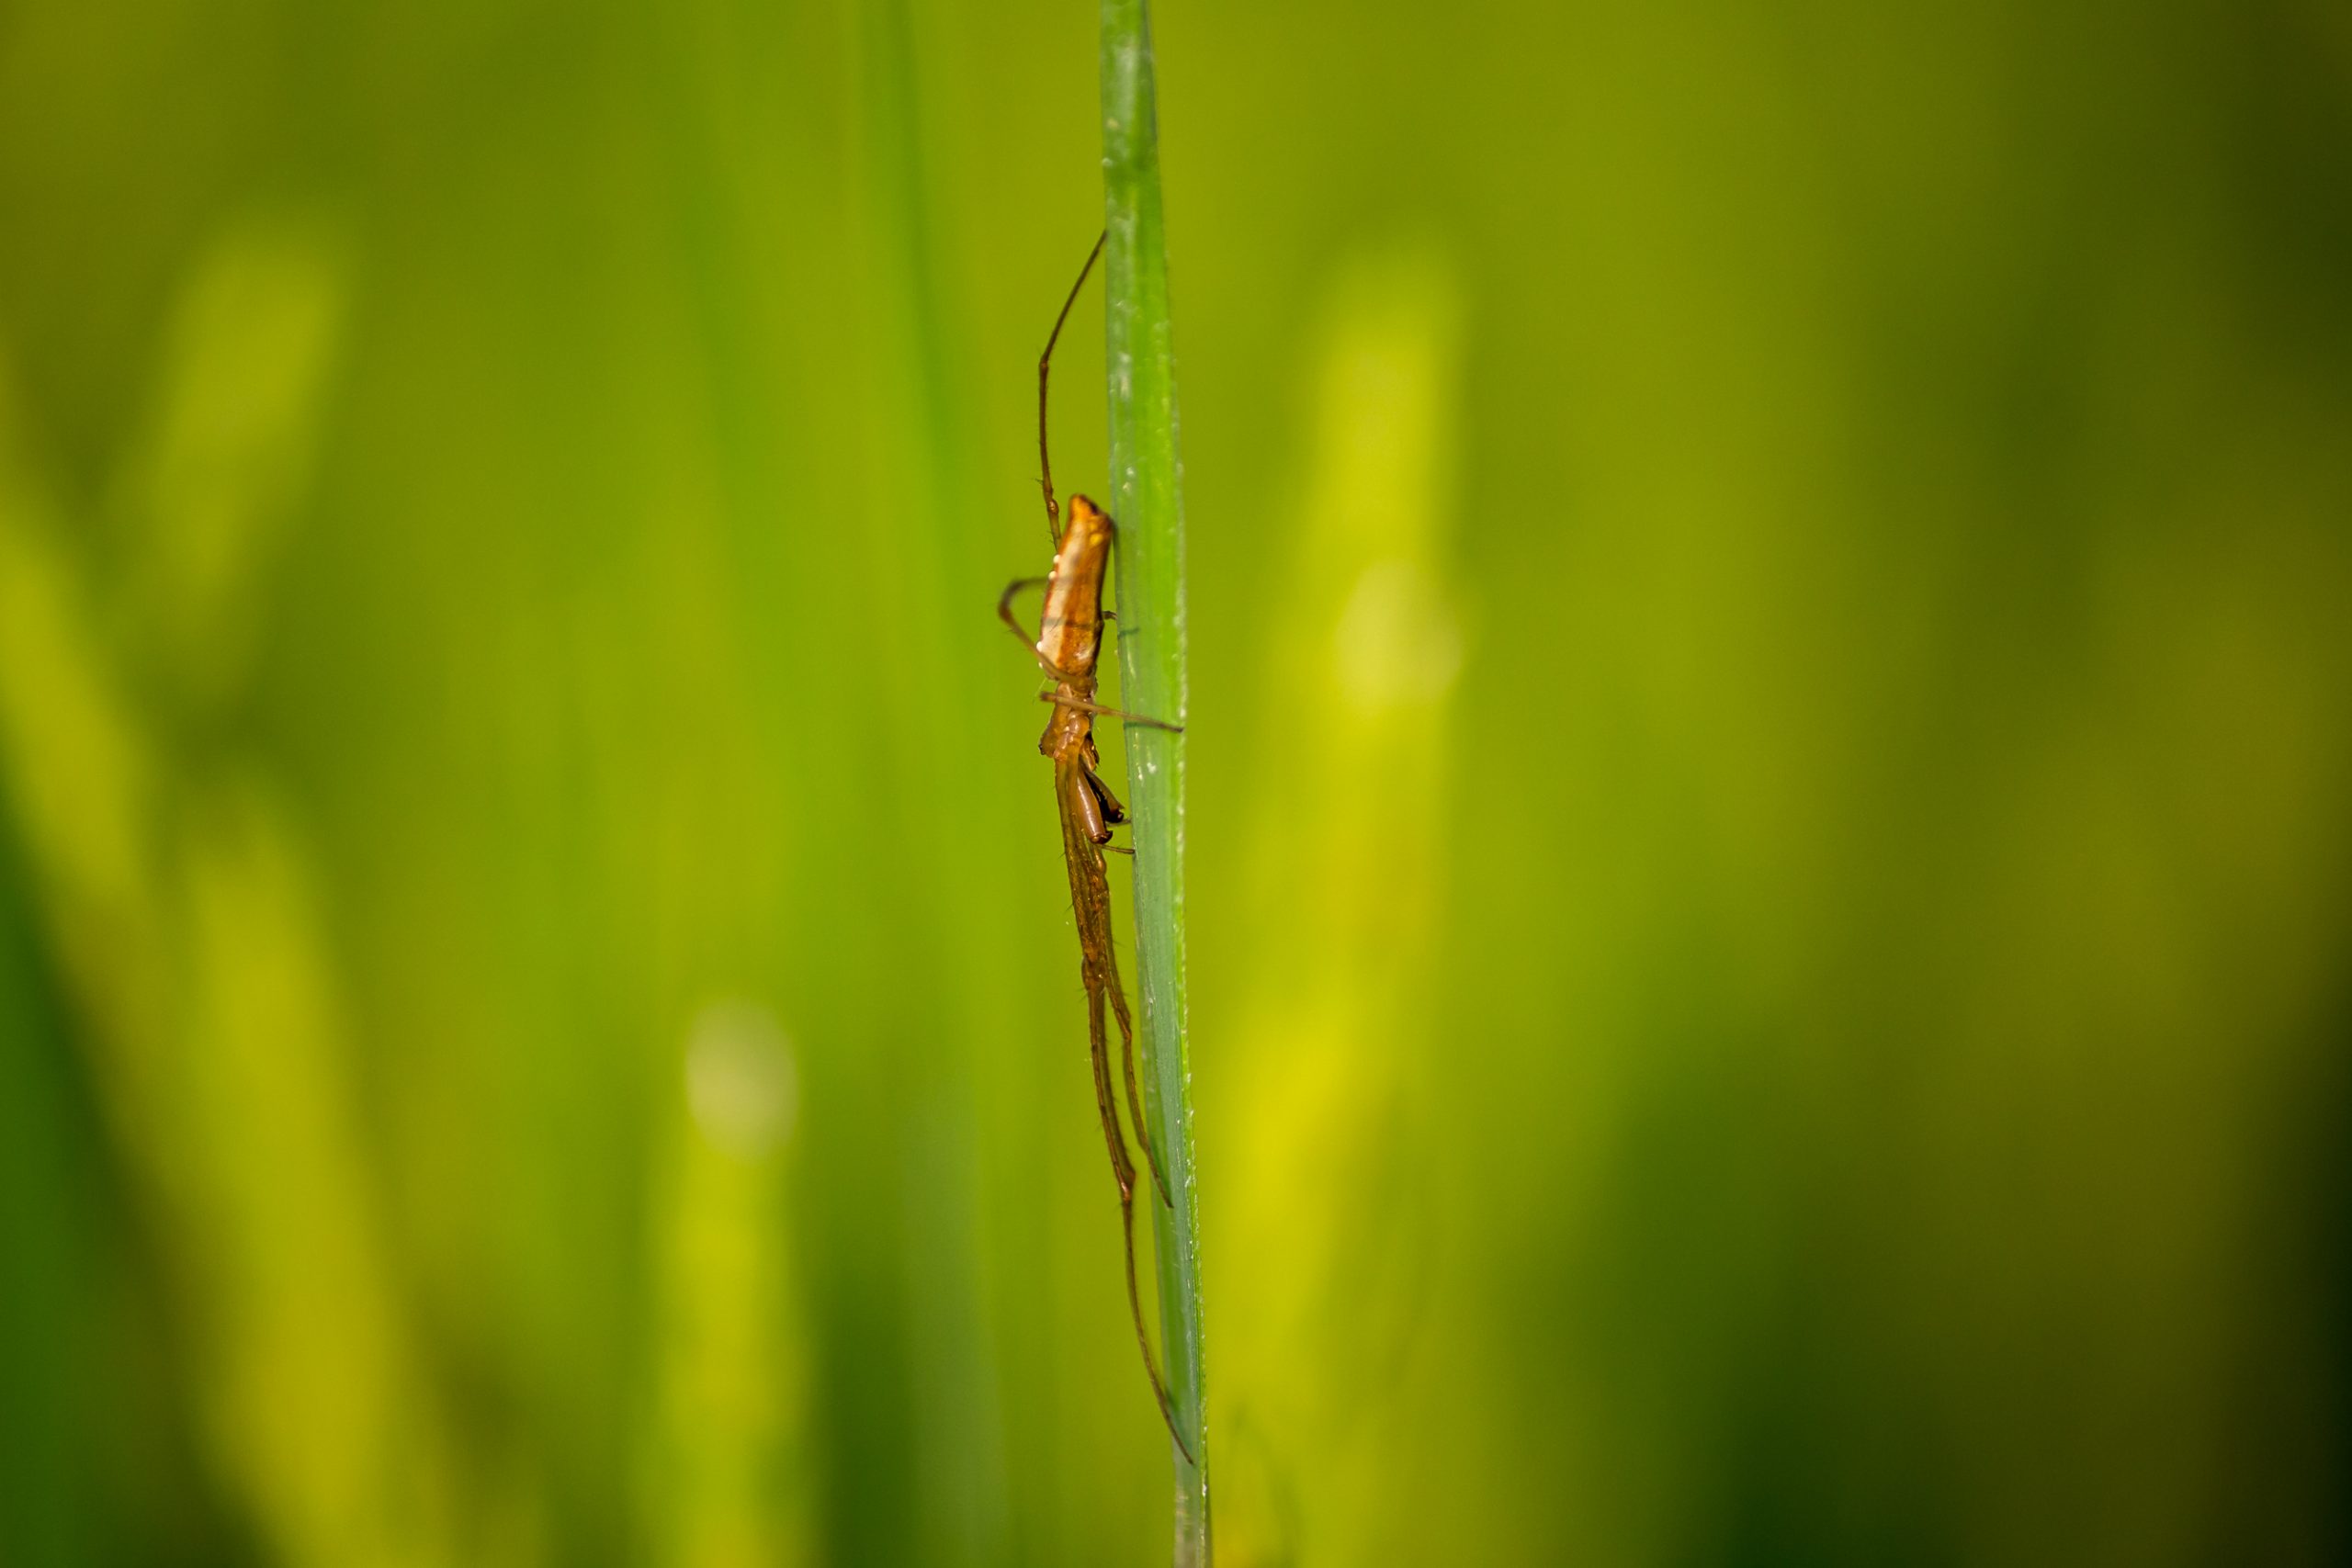 An insect on a plant stem